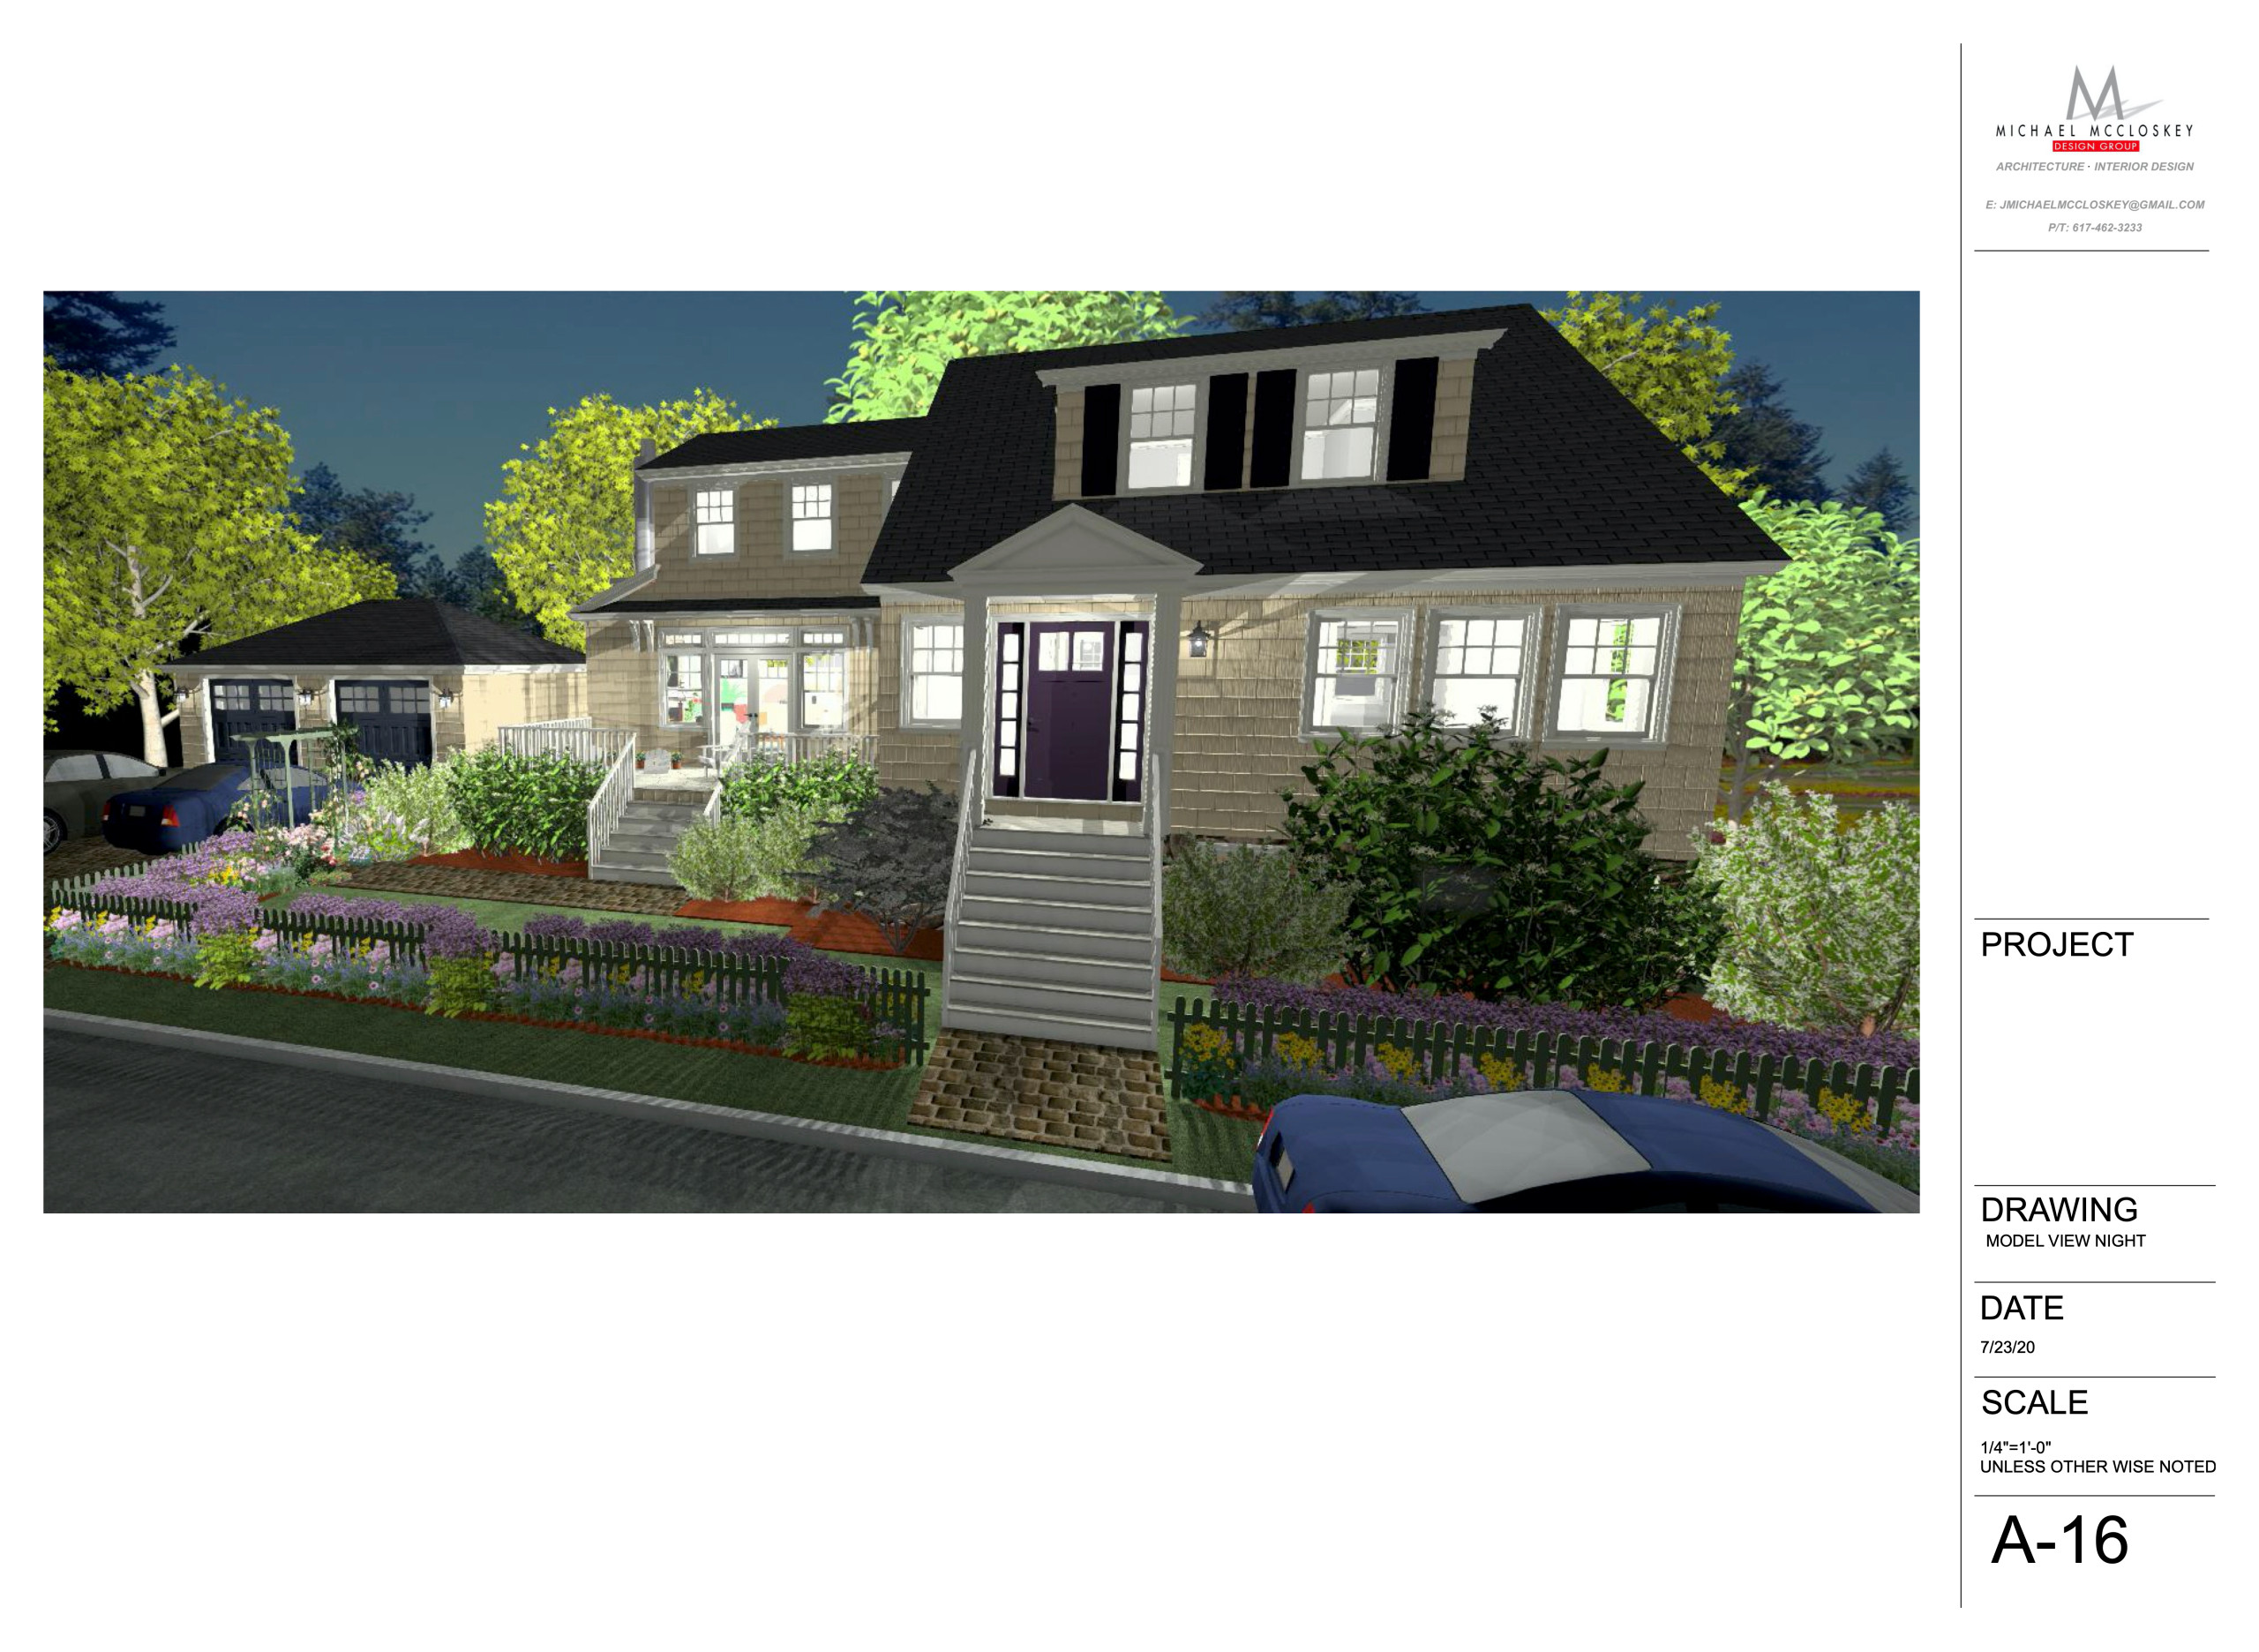 Renovation, addition to house in swampscott